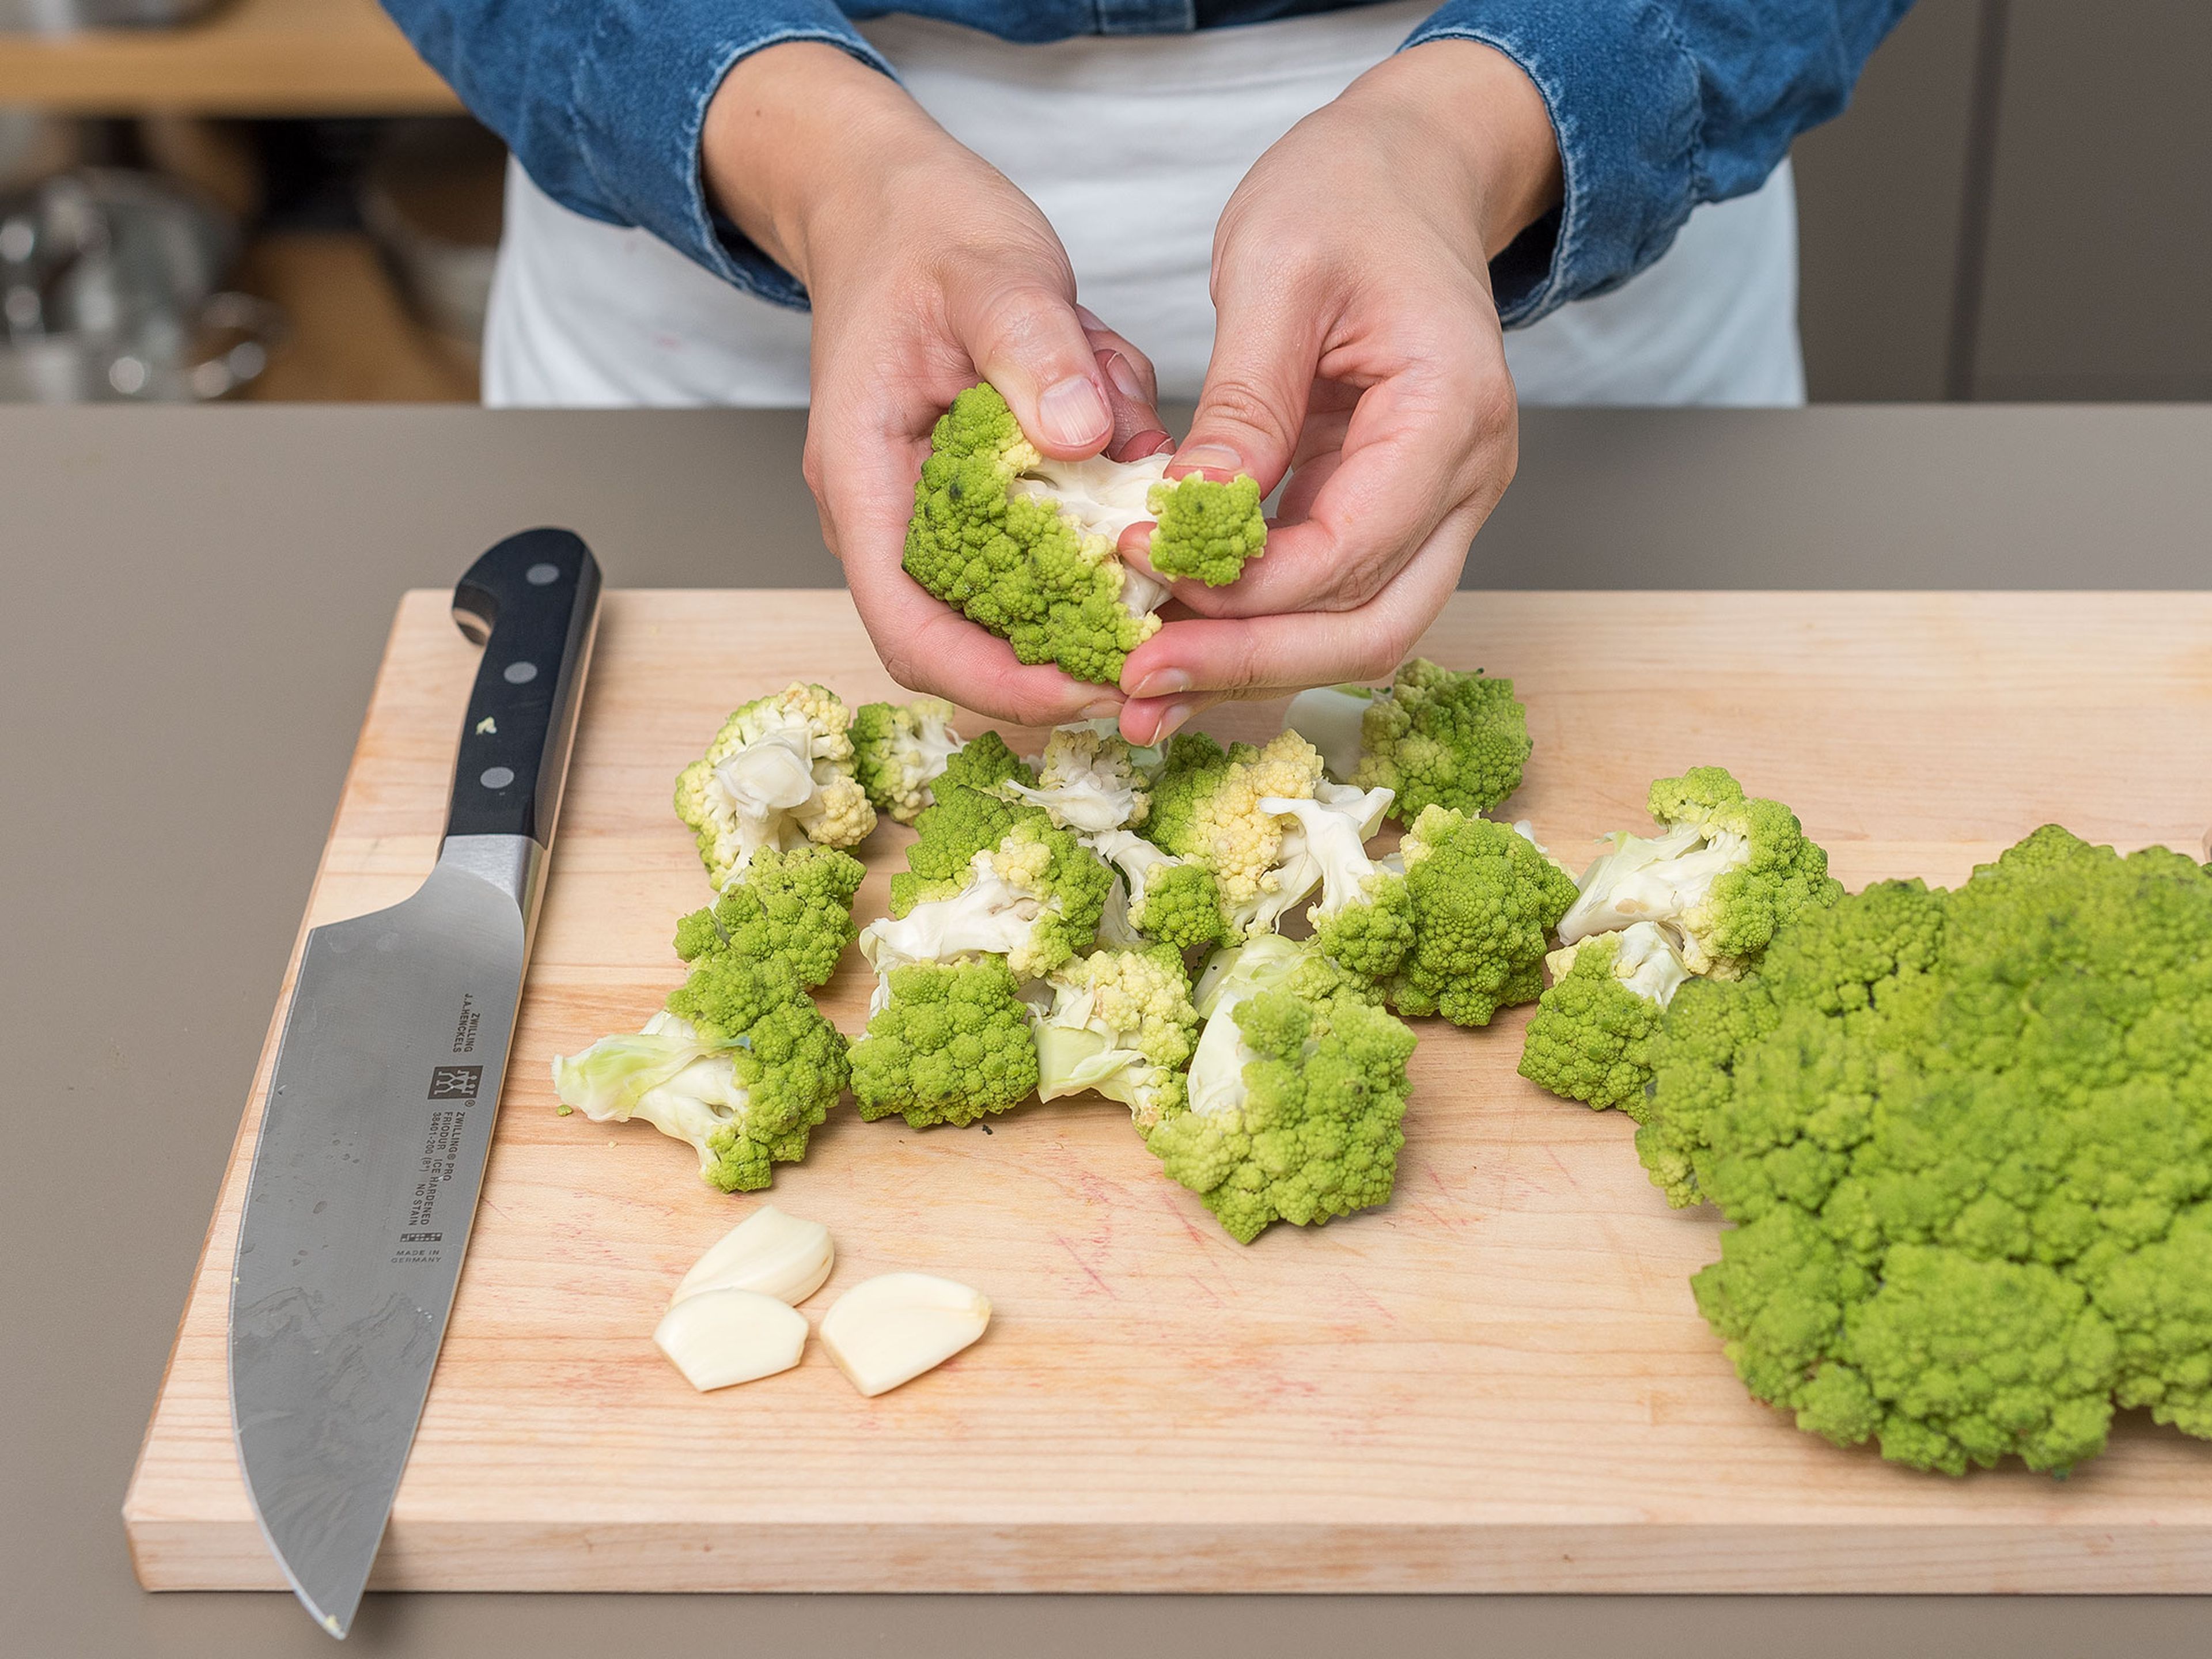 Preheat the oven to 180°C/350°F on convection heat. Thoroughly rinse the Romanesco under cold water, dry, remove the outer leaves, and cut the florets from the stalk. Peel the garlic cloves and mince.